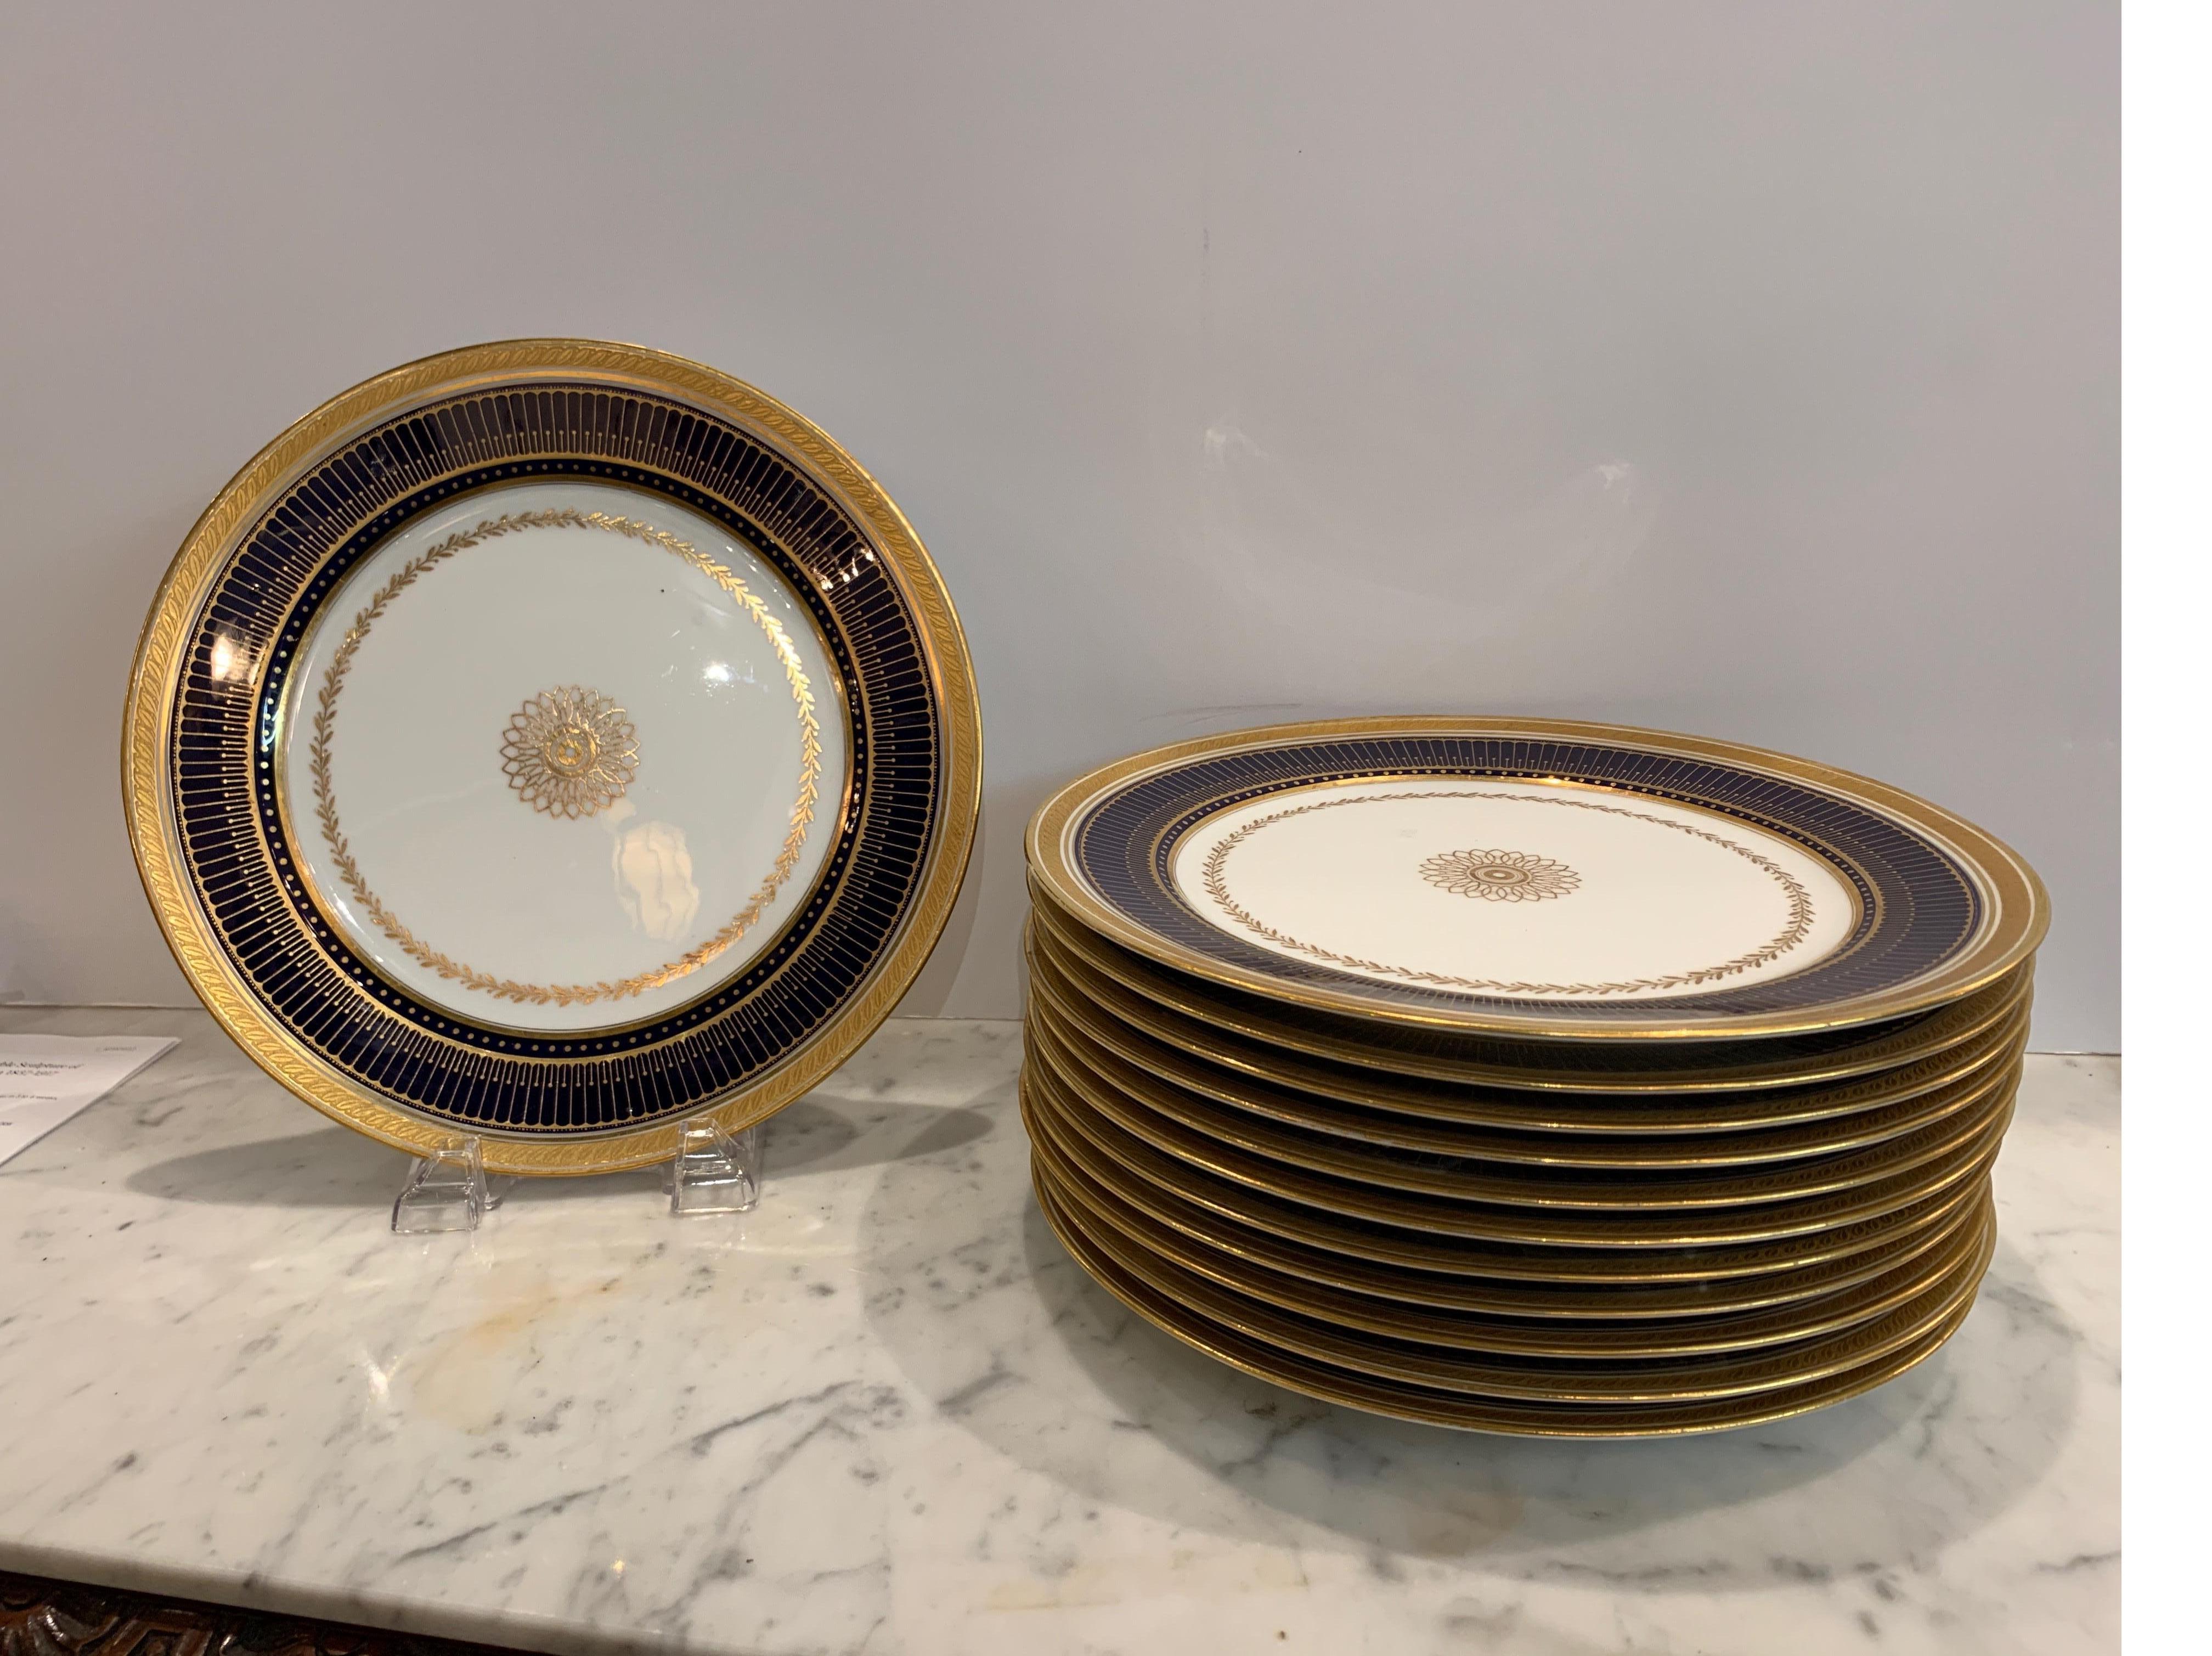 Set of twelve gold gilt and cobalt service plates BWM & Co For Gillman, NYC,
circa early 1900s in very good original condition.